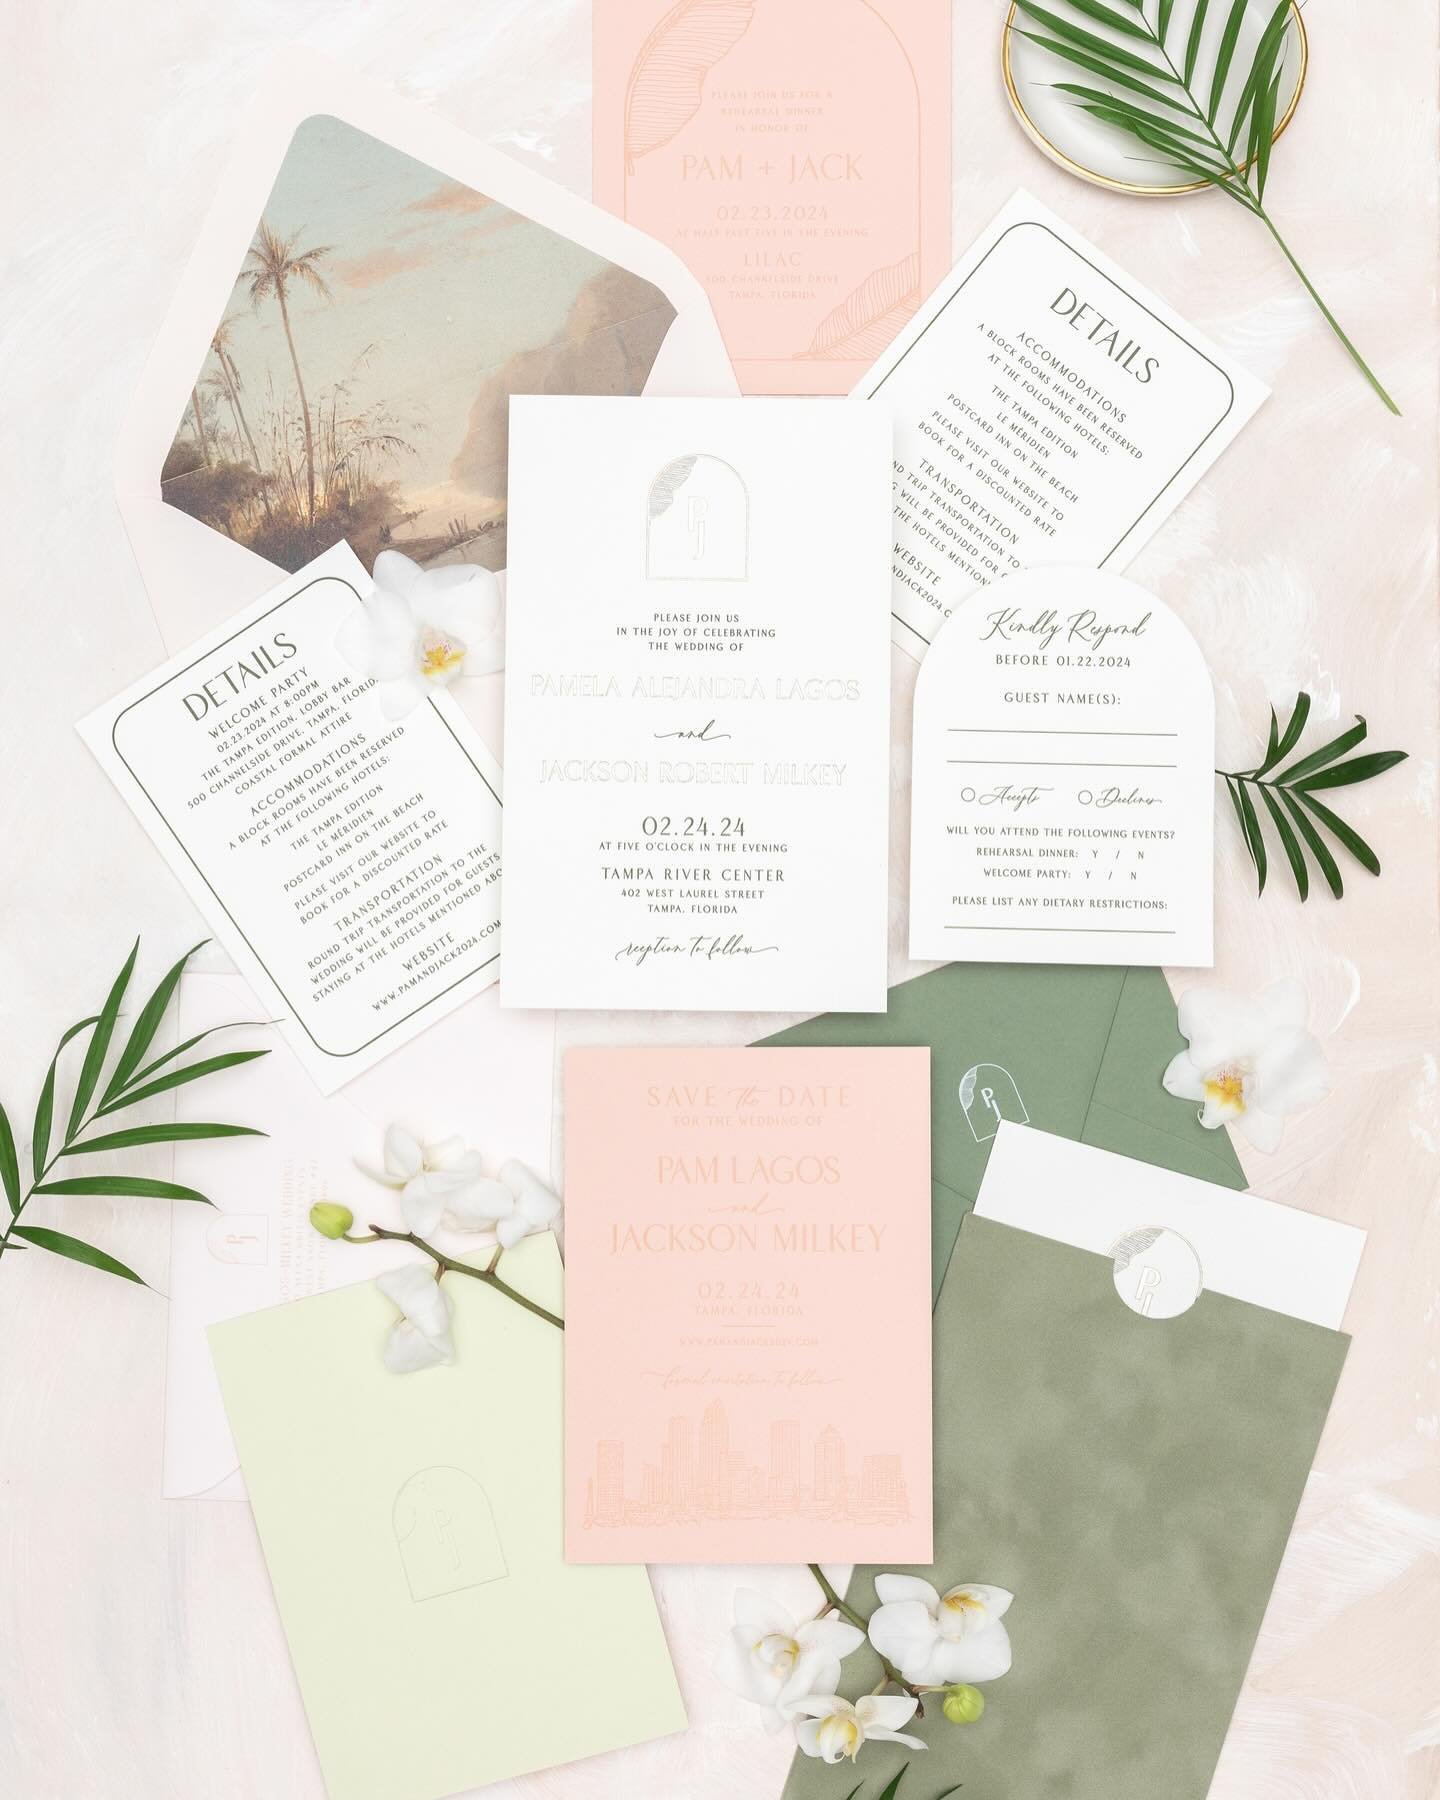 An invitation suite for a chic beachside affair. The invitation background was a blind embossed pattern, the text gold foil stamped. The reply card was arched shaped to mimic the couple&rsquo;s monogram. The suite was enclosed in a velvet sleeve, and